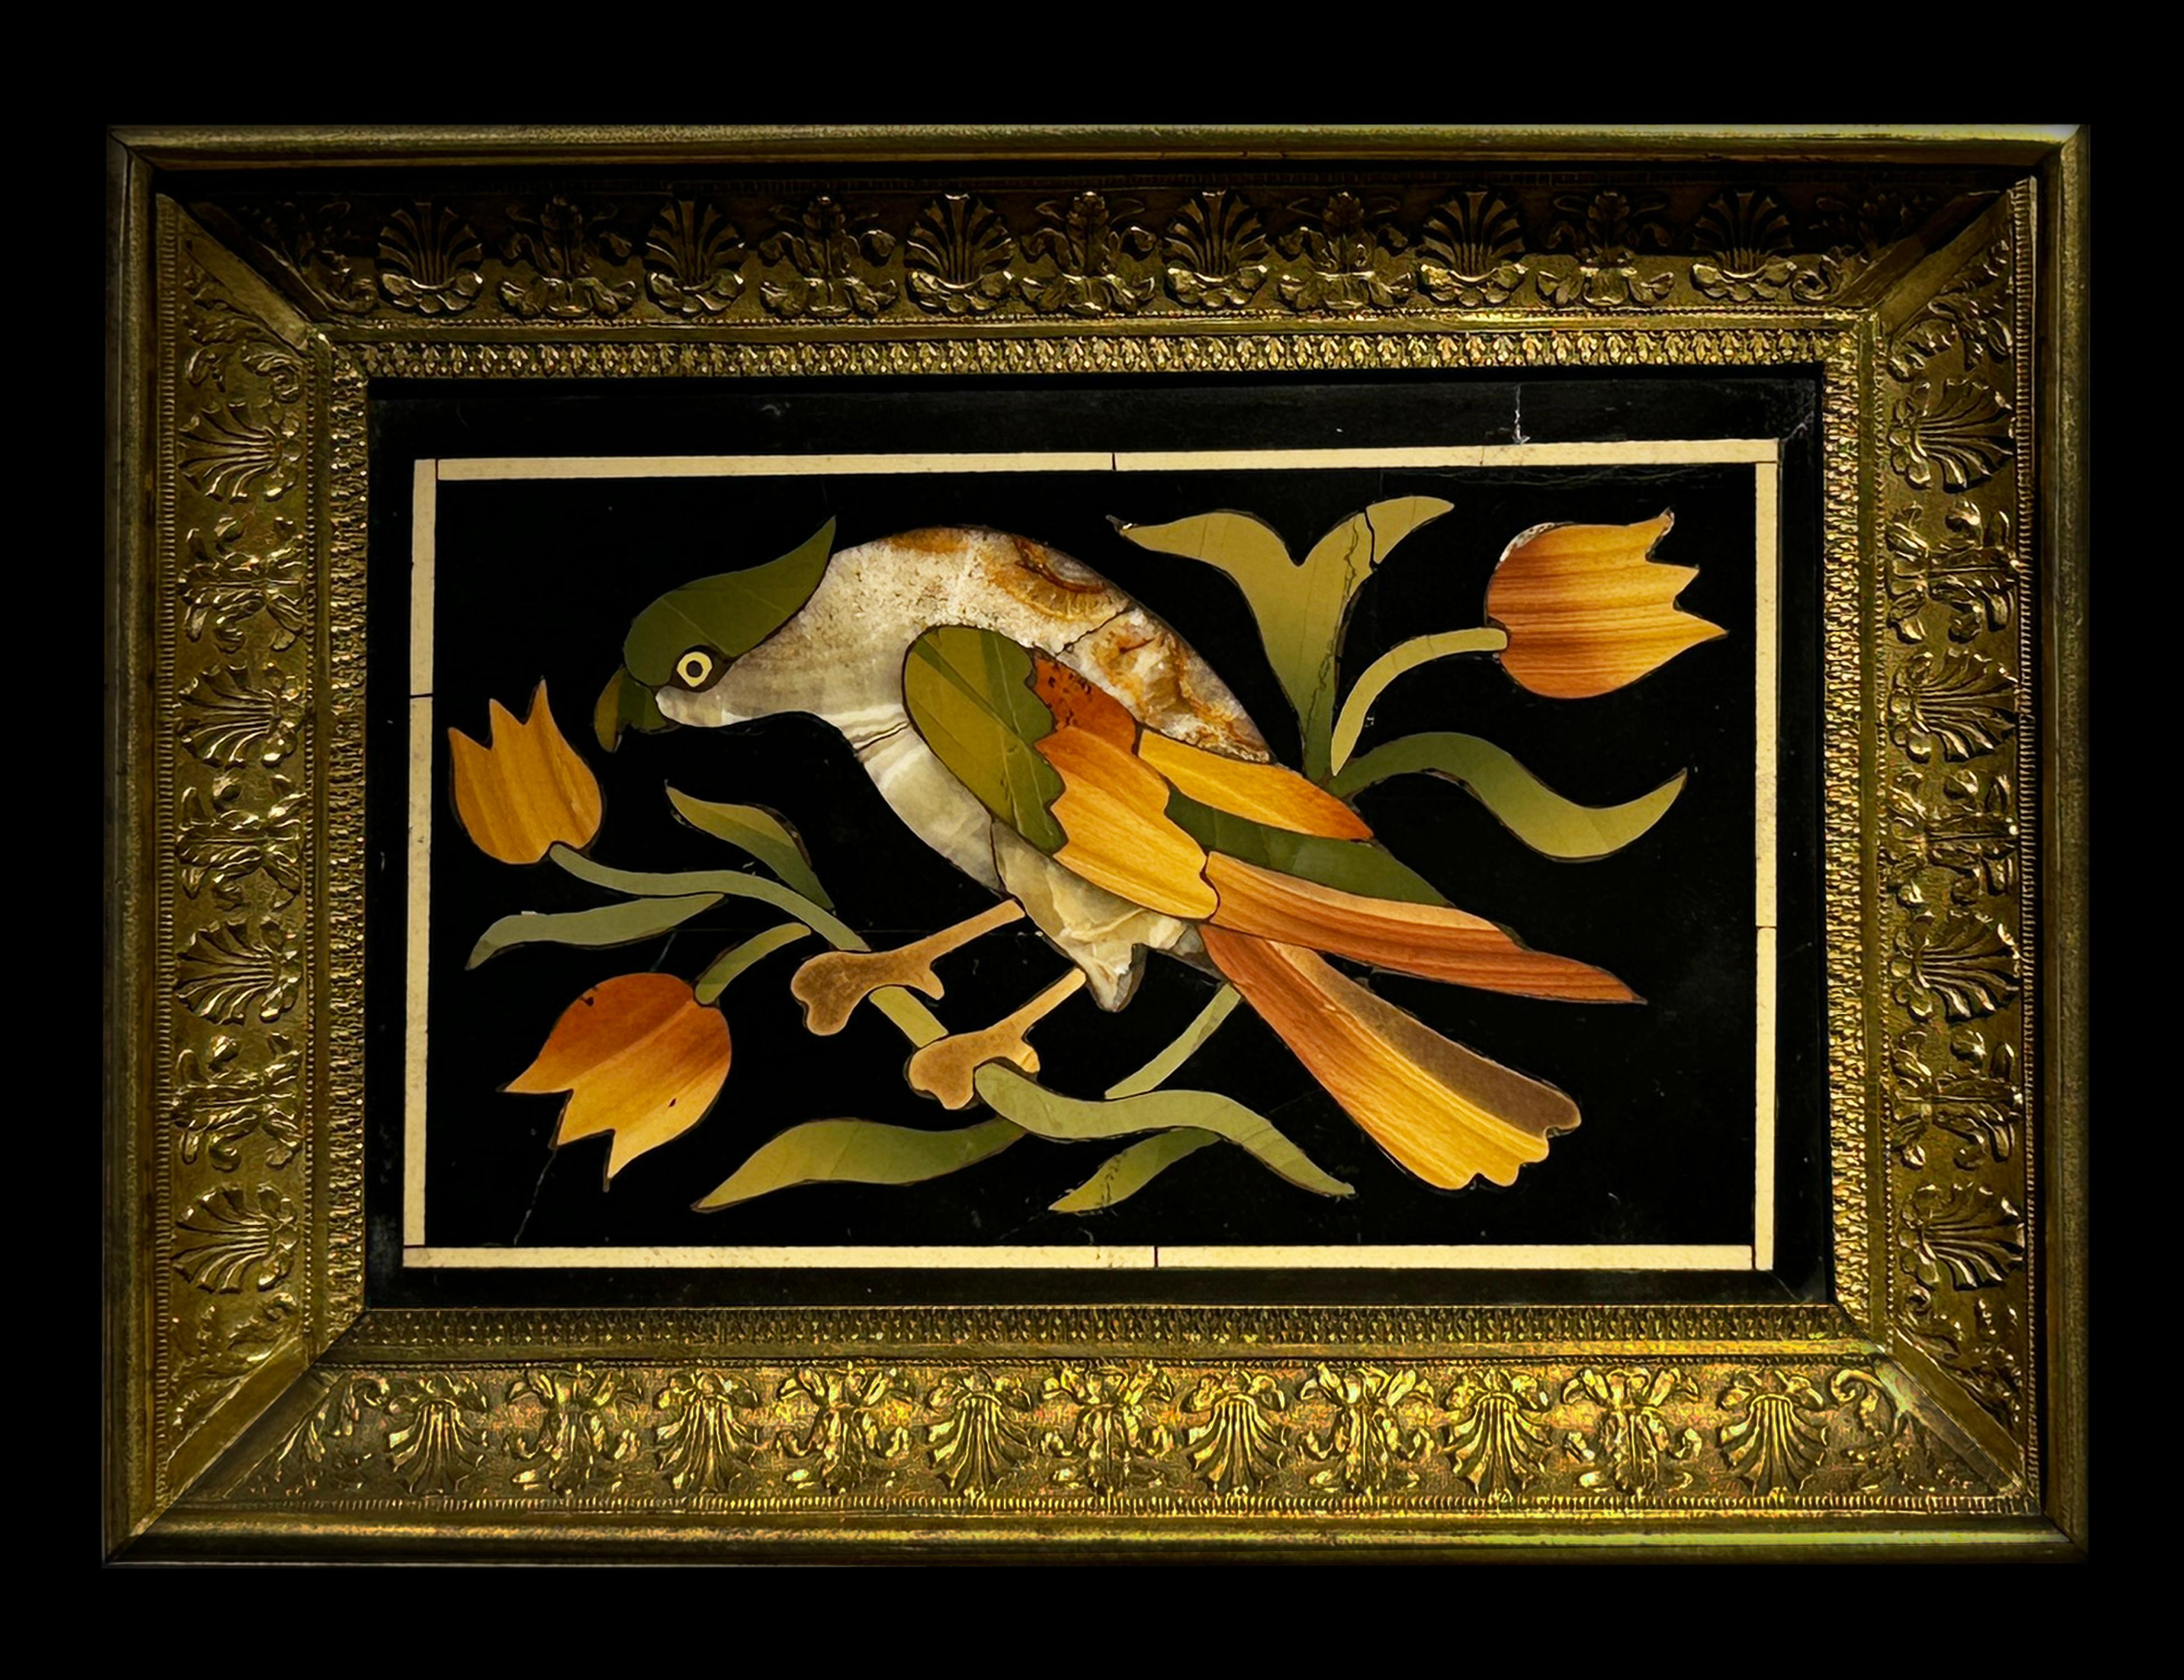 PAIR OF FLORENTINE PIETRA DURA PLAQUES WITH BIRDS IN GILT BRONZE FRAME
Florence, 18 Century
Pietra dura, gilt bronze frame

7.5 x 11.5 cm (3 x 4 1/2 in) without frame
11.4 x 15.5 cm (4 1/2 x 6 in) with frame